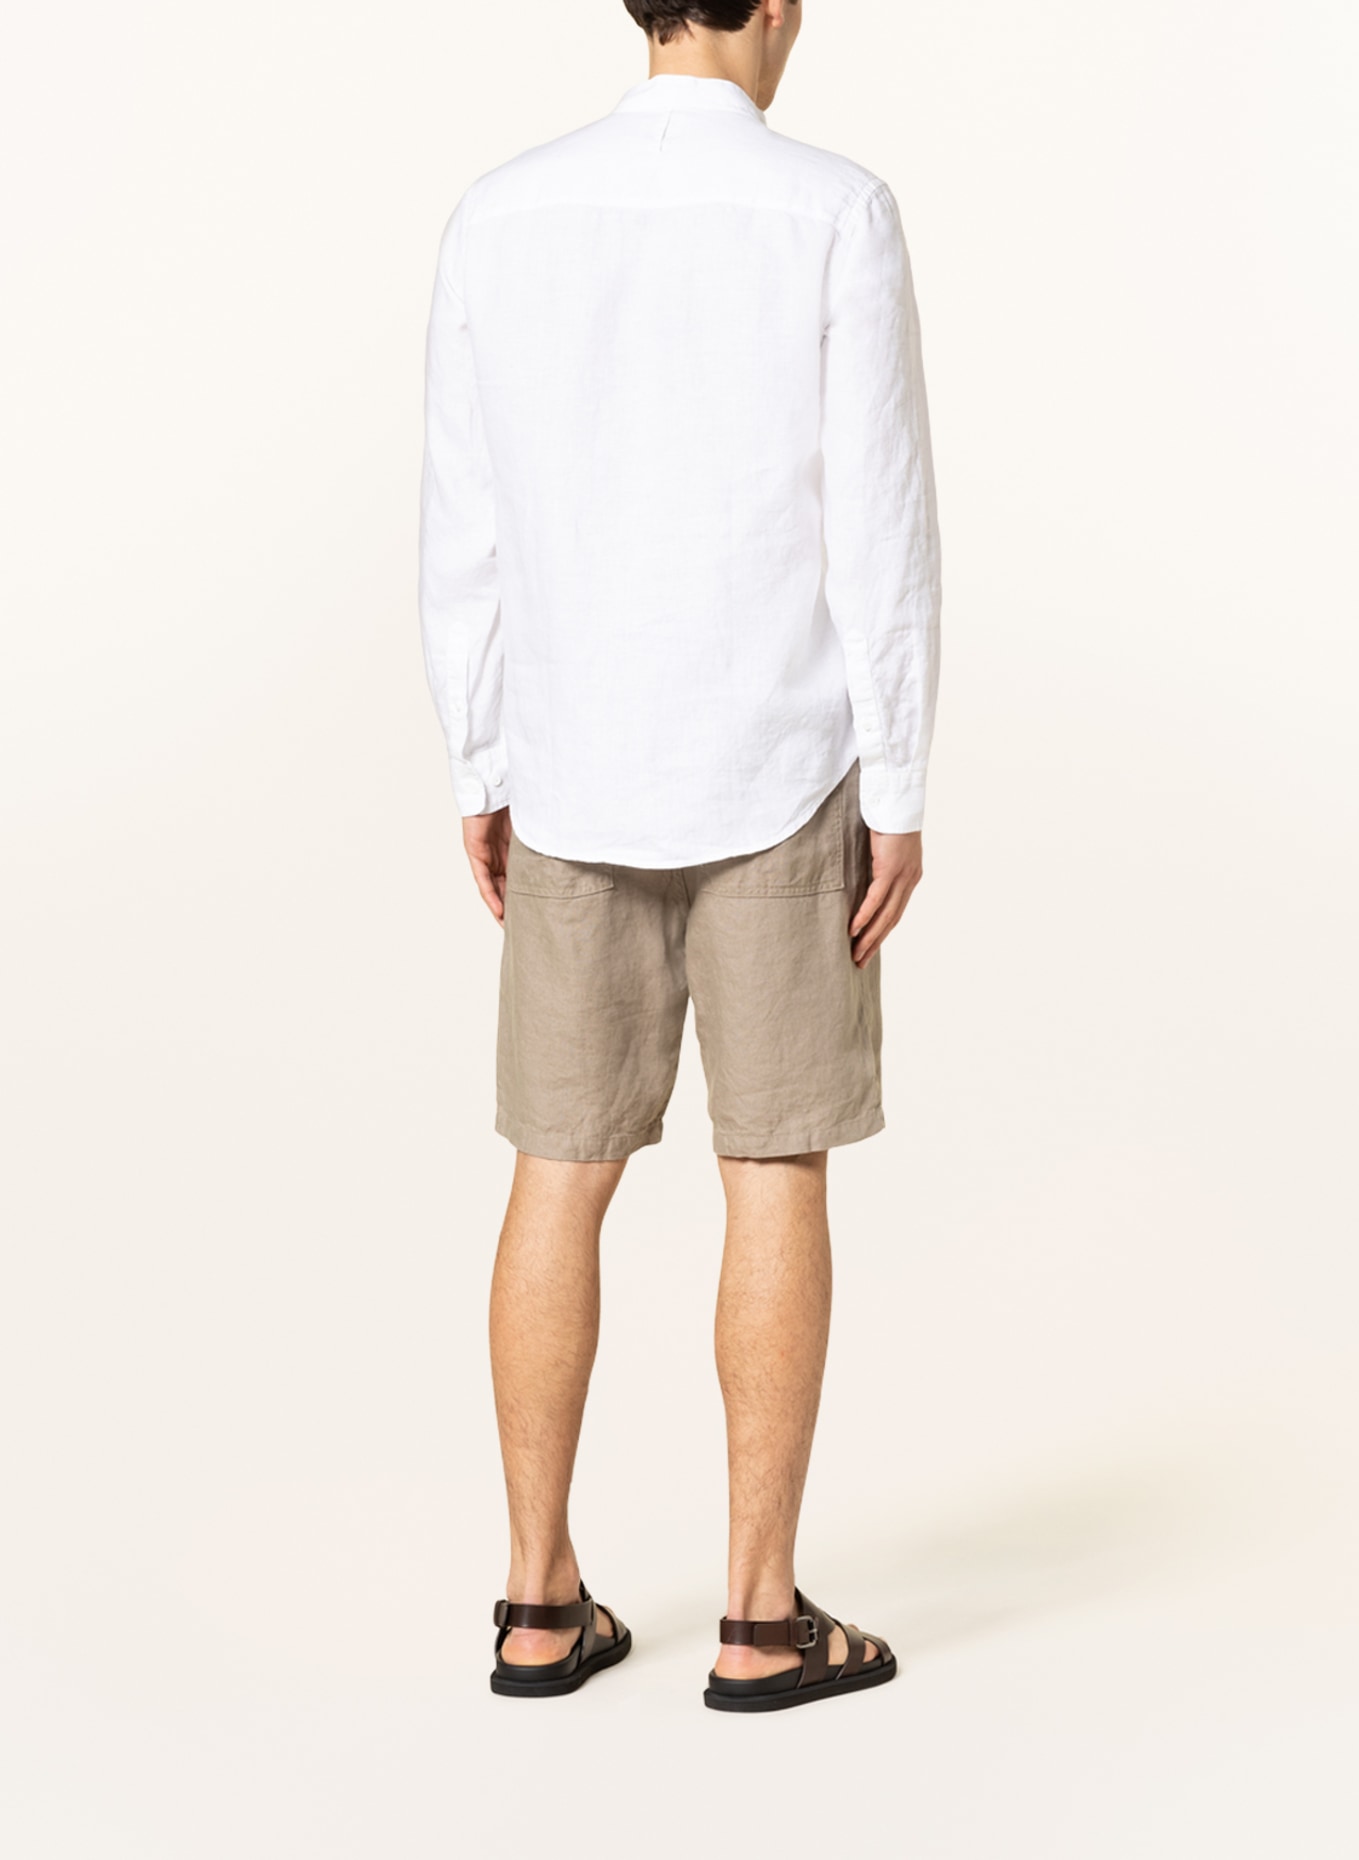 NN.07 Linen shirt EDDIE regular fit with stand-up collar, Color: WHITE (Image 3)